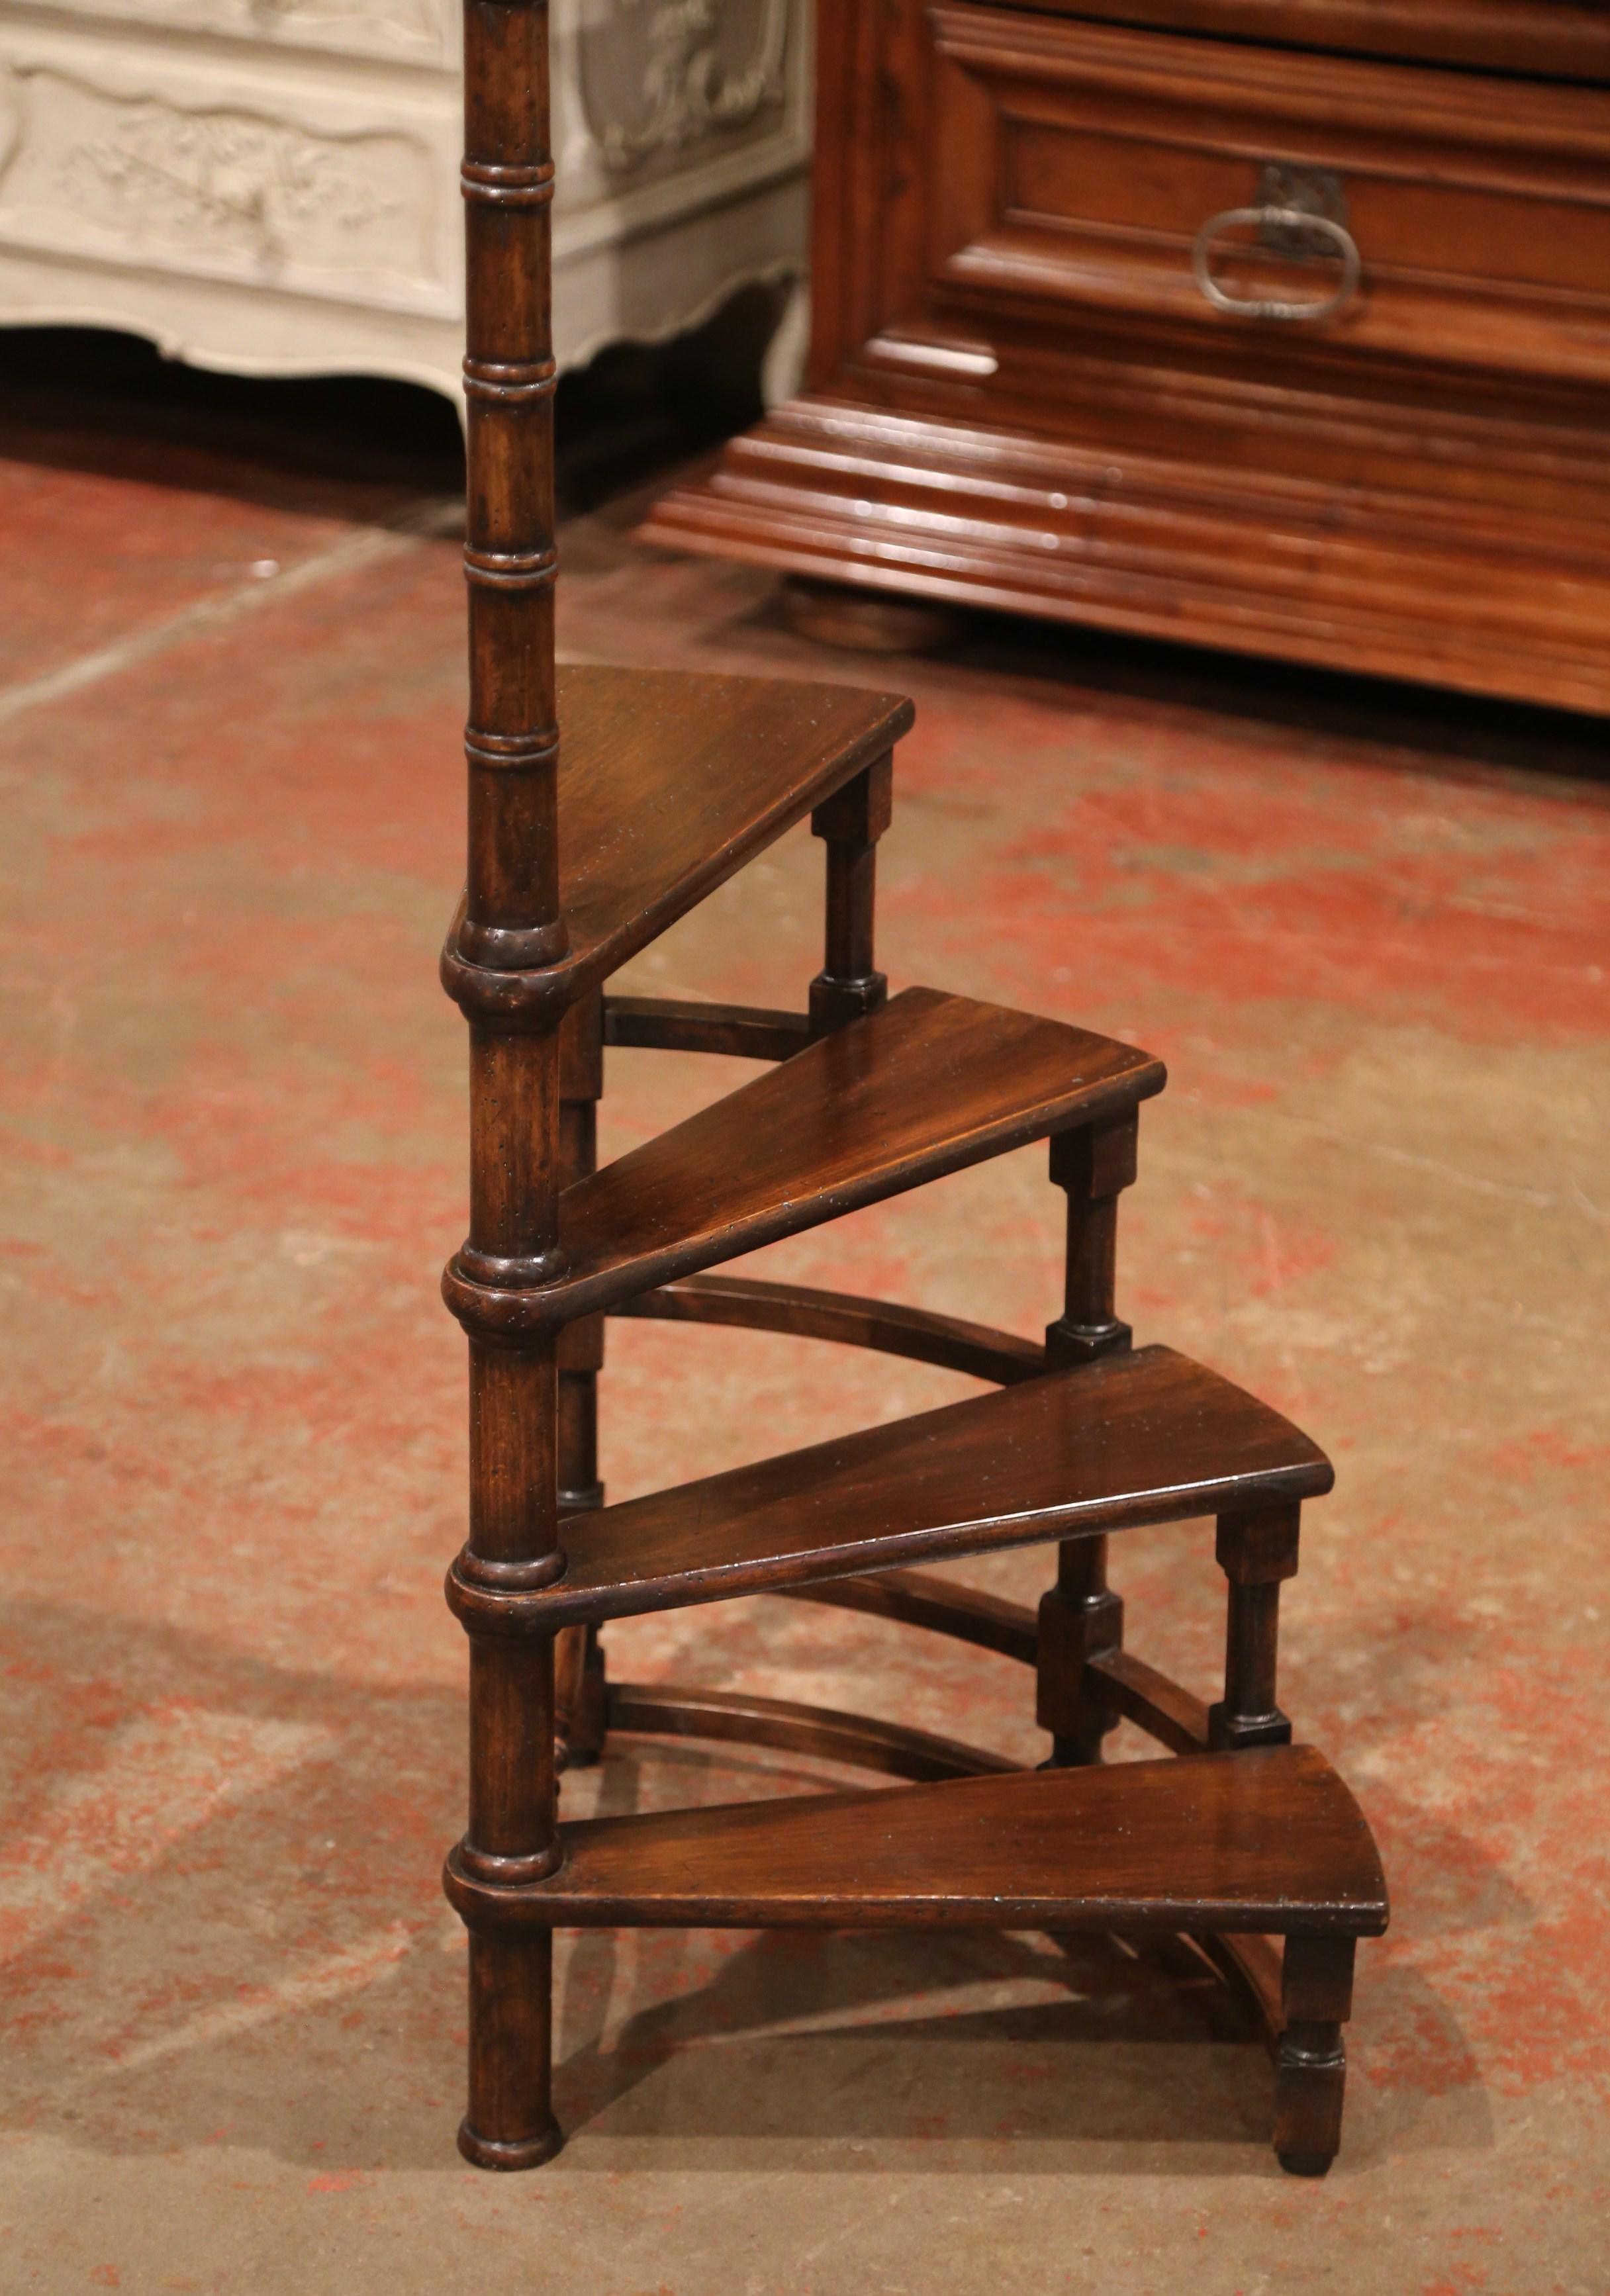 Use this vintage fruitwood staircase to organize books in your office or library. Created in France circa 1980 and standing on four turned legs, the small circular step ladder features four stairs roll around a turned, central post. Versatile and